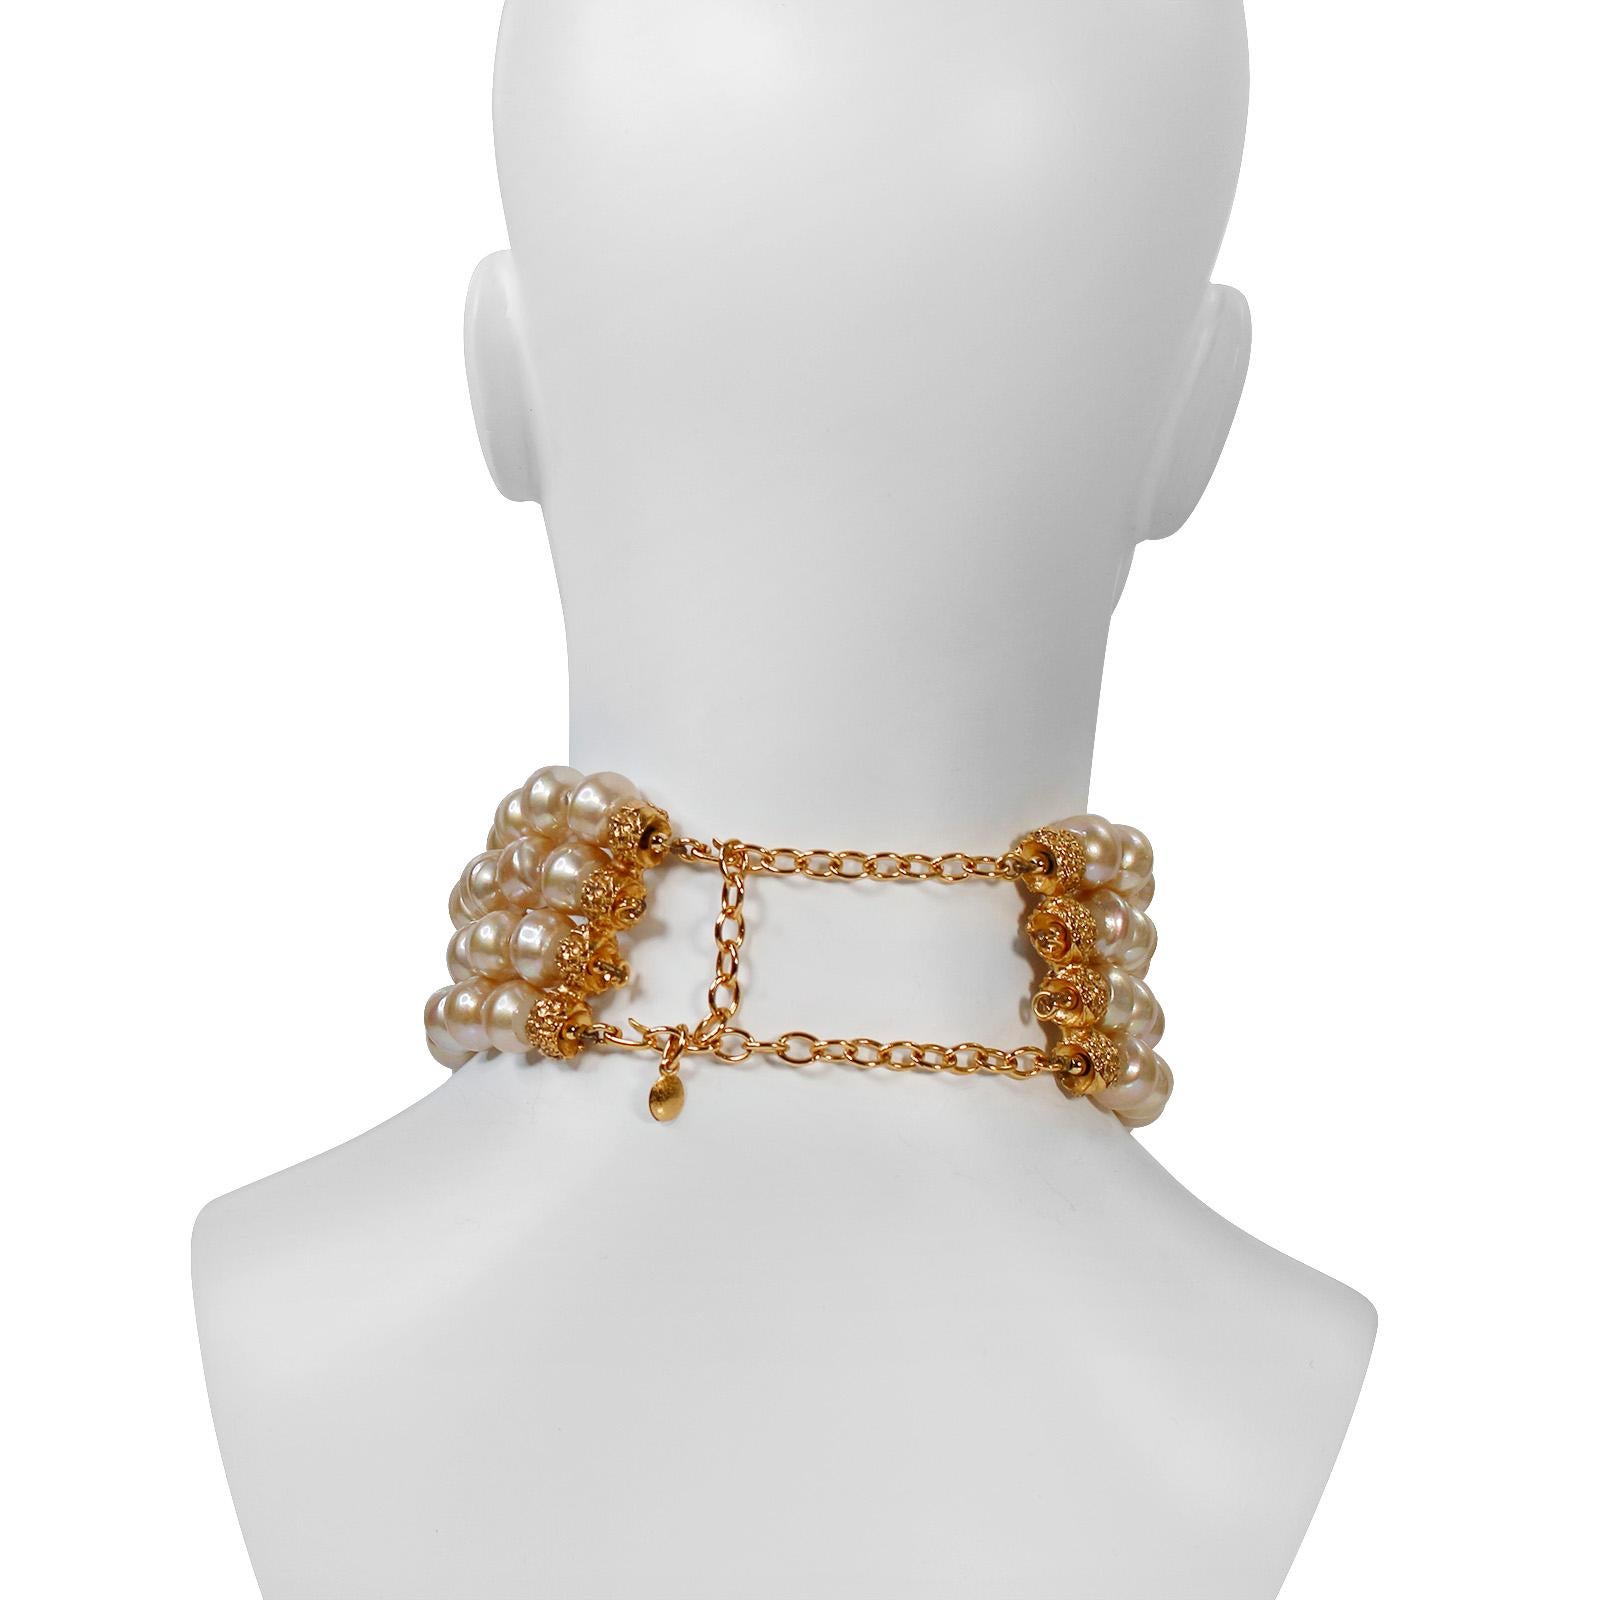 Vintage Christian Dior  Couture Gold Tone and Pearl Necklace Circa 1980s For Sale 1